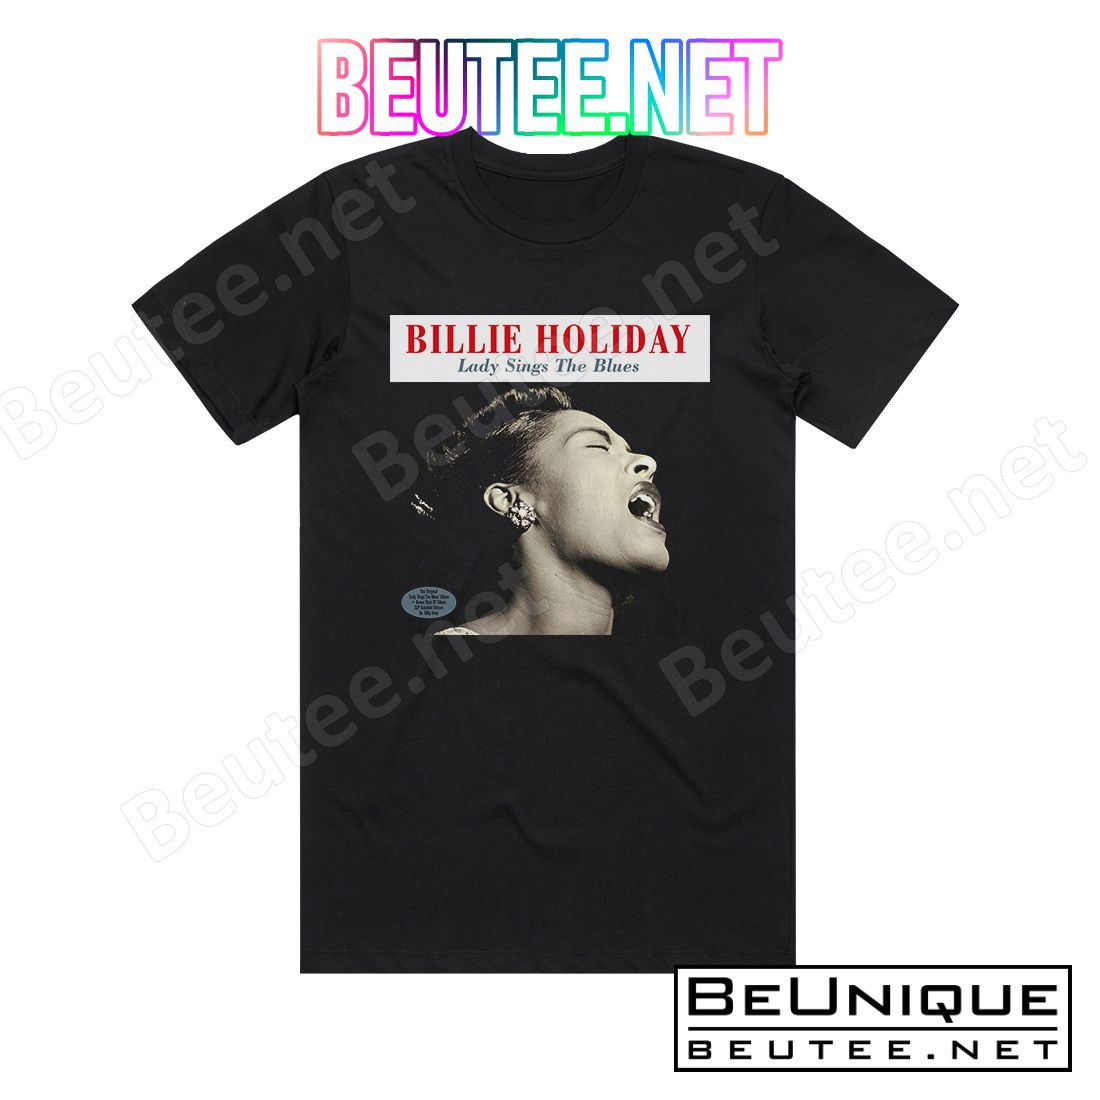 Billie Holiday Lady Sings The Blues 1 Album Cover T-Shirt